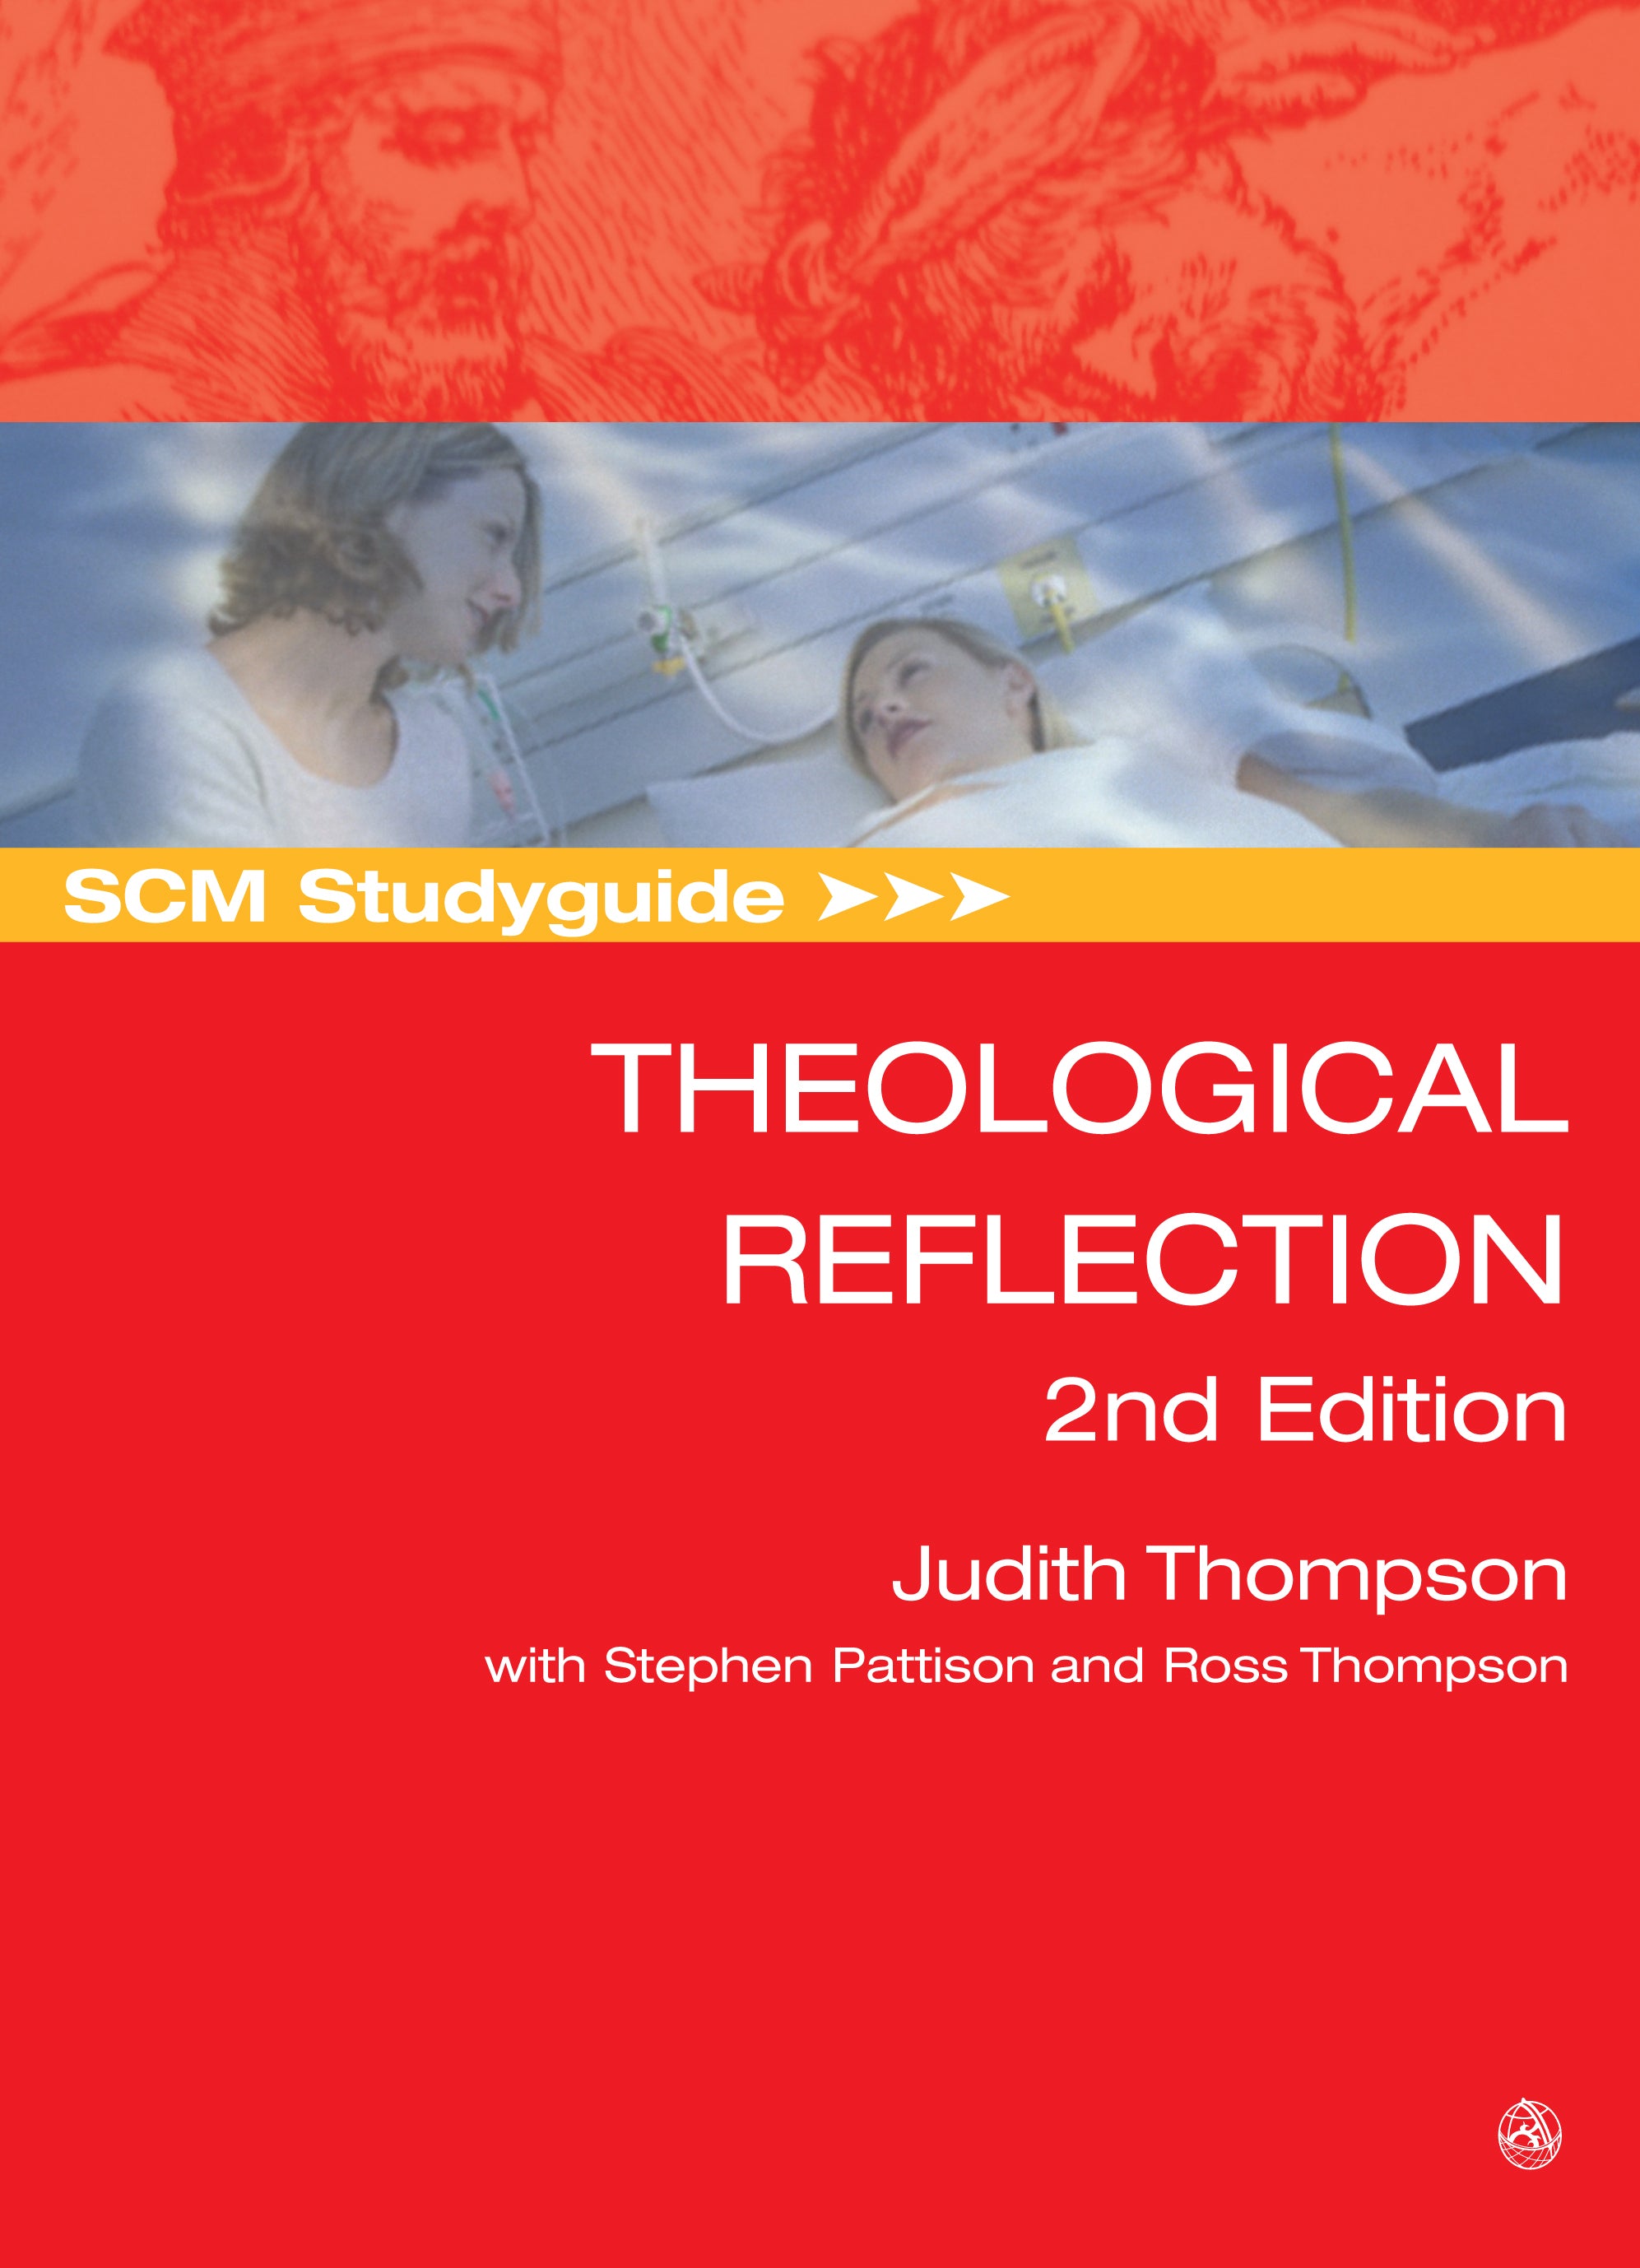 Image of Scm Studyguide: Theological Reflection: 2nd Edition other